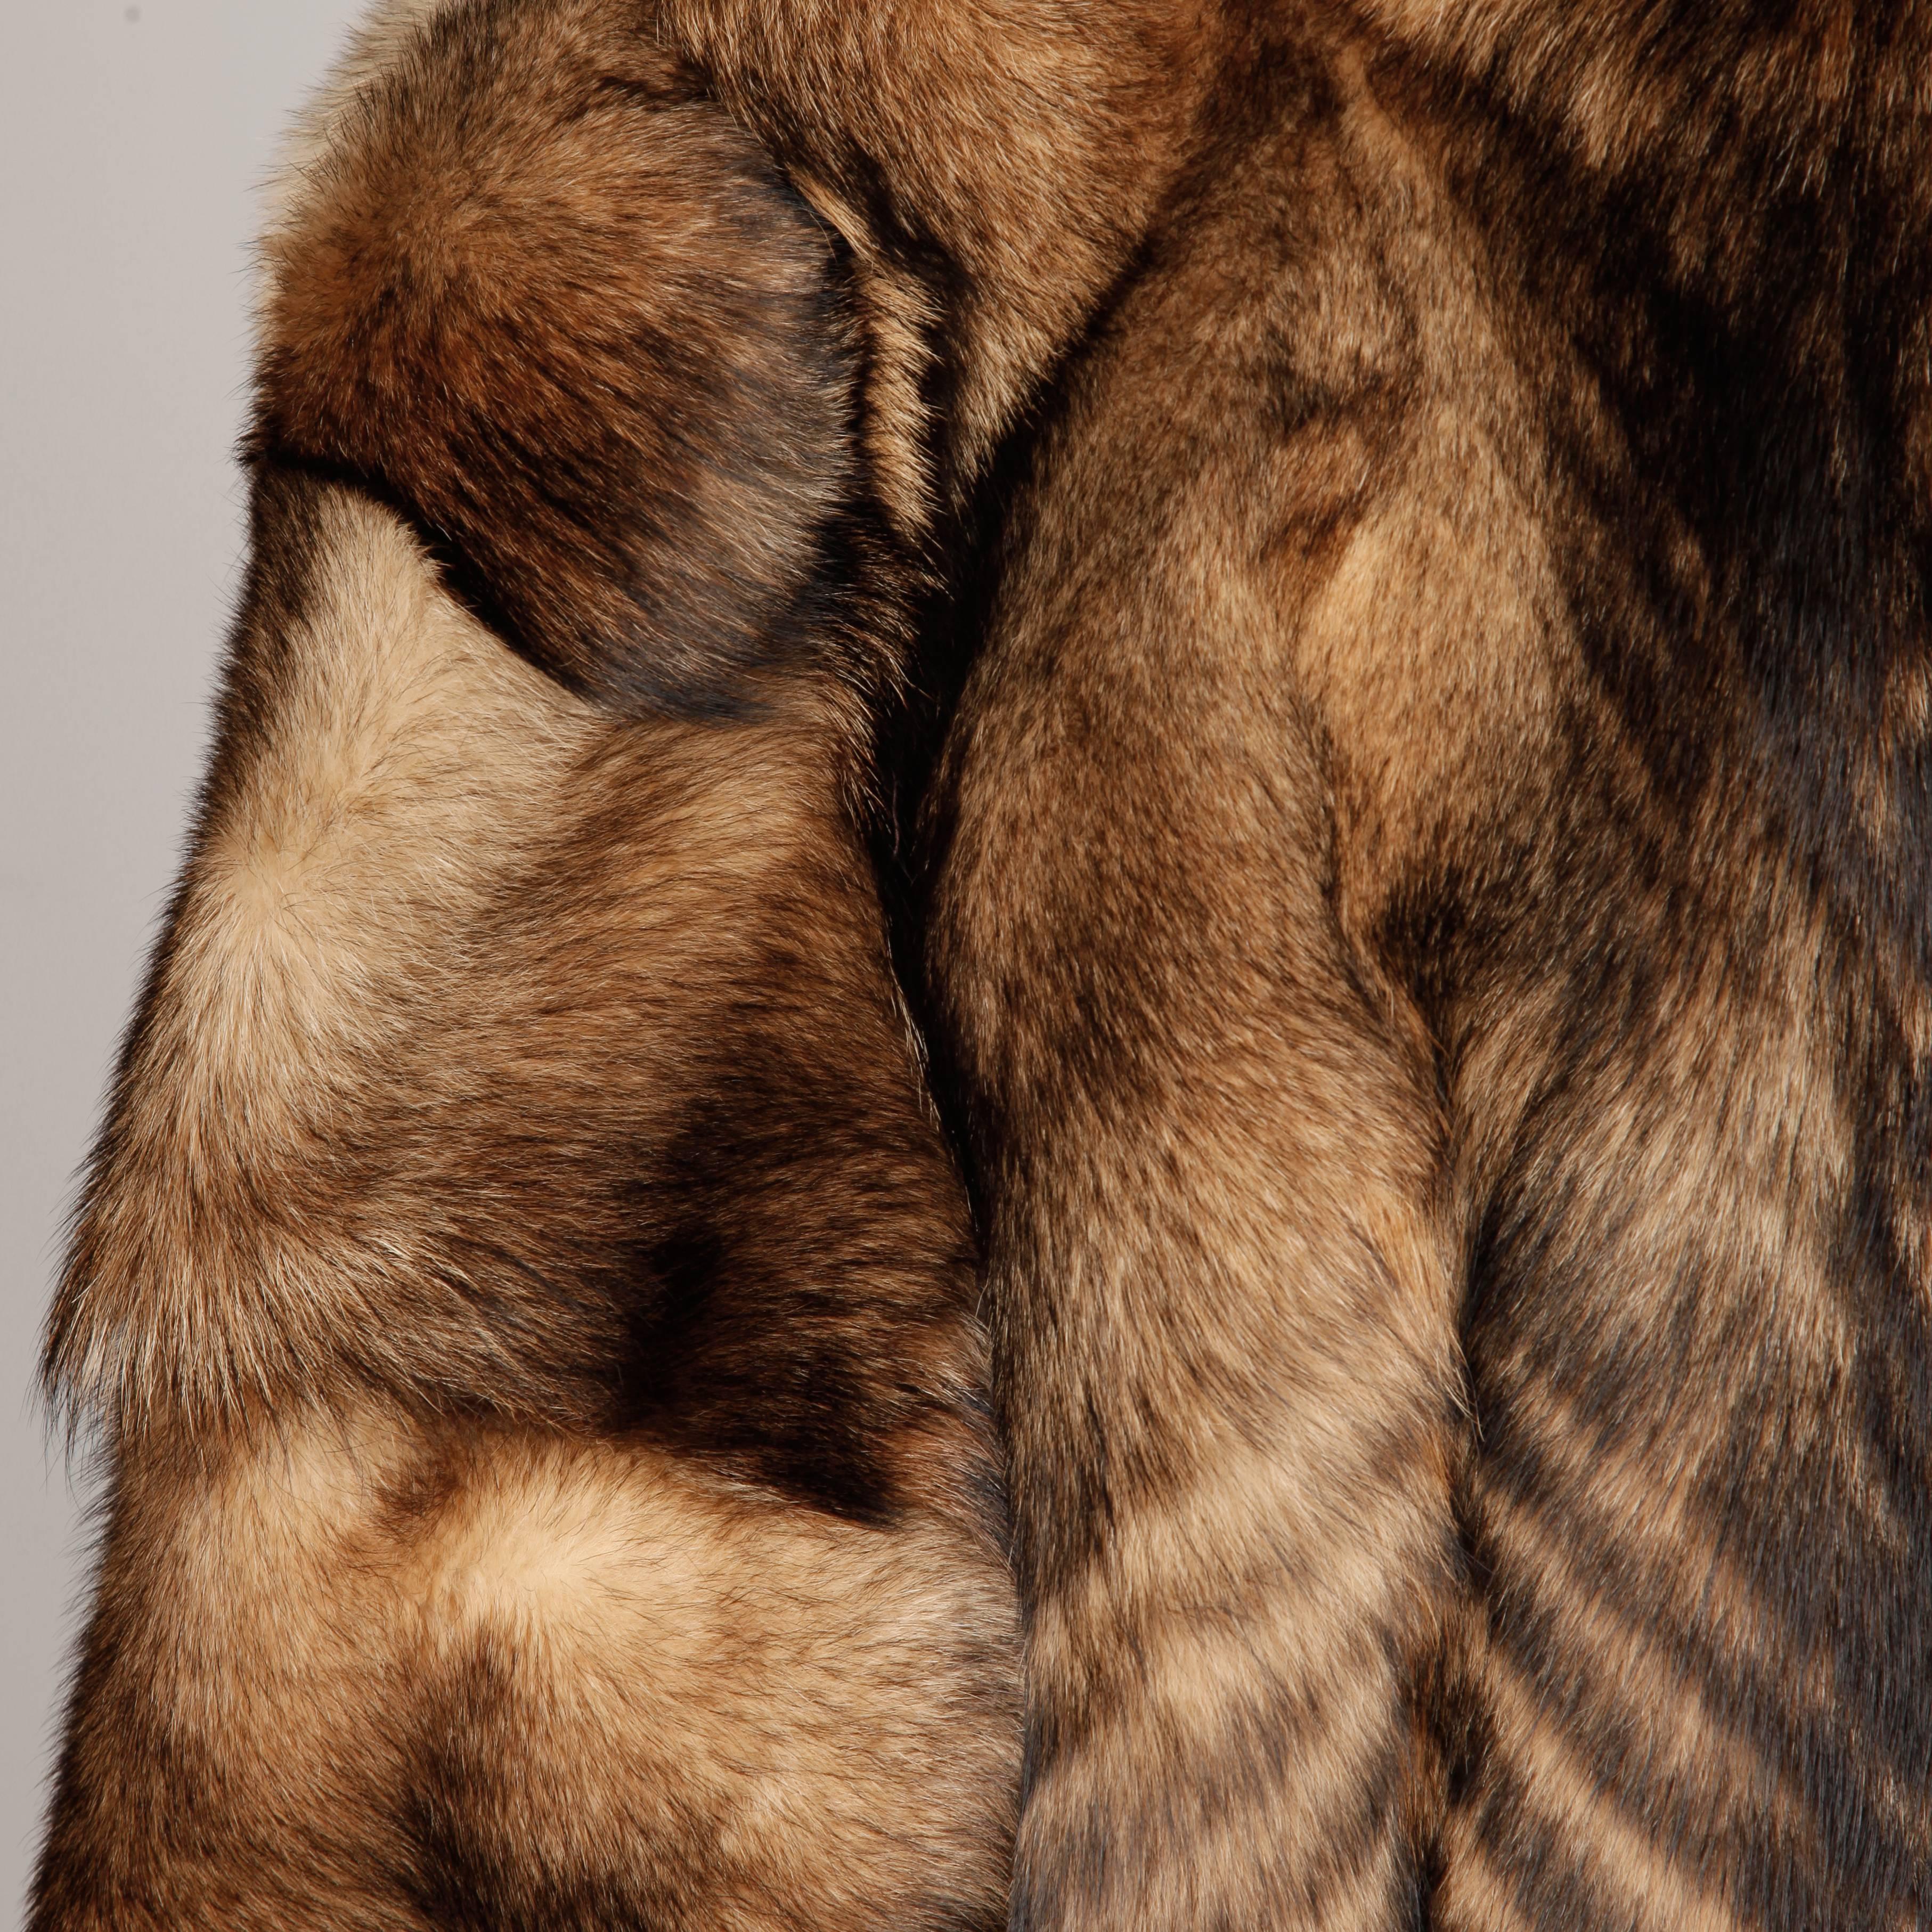 Stunning vintage wolf fur coat feathered in a chevron design along the bottom portion. Full sleeves and gorgeously matched pelts. Fully lined with front hook closure. Unisex cut fits like a women's large/ men's medium. The bust measures 42